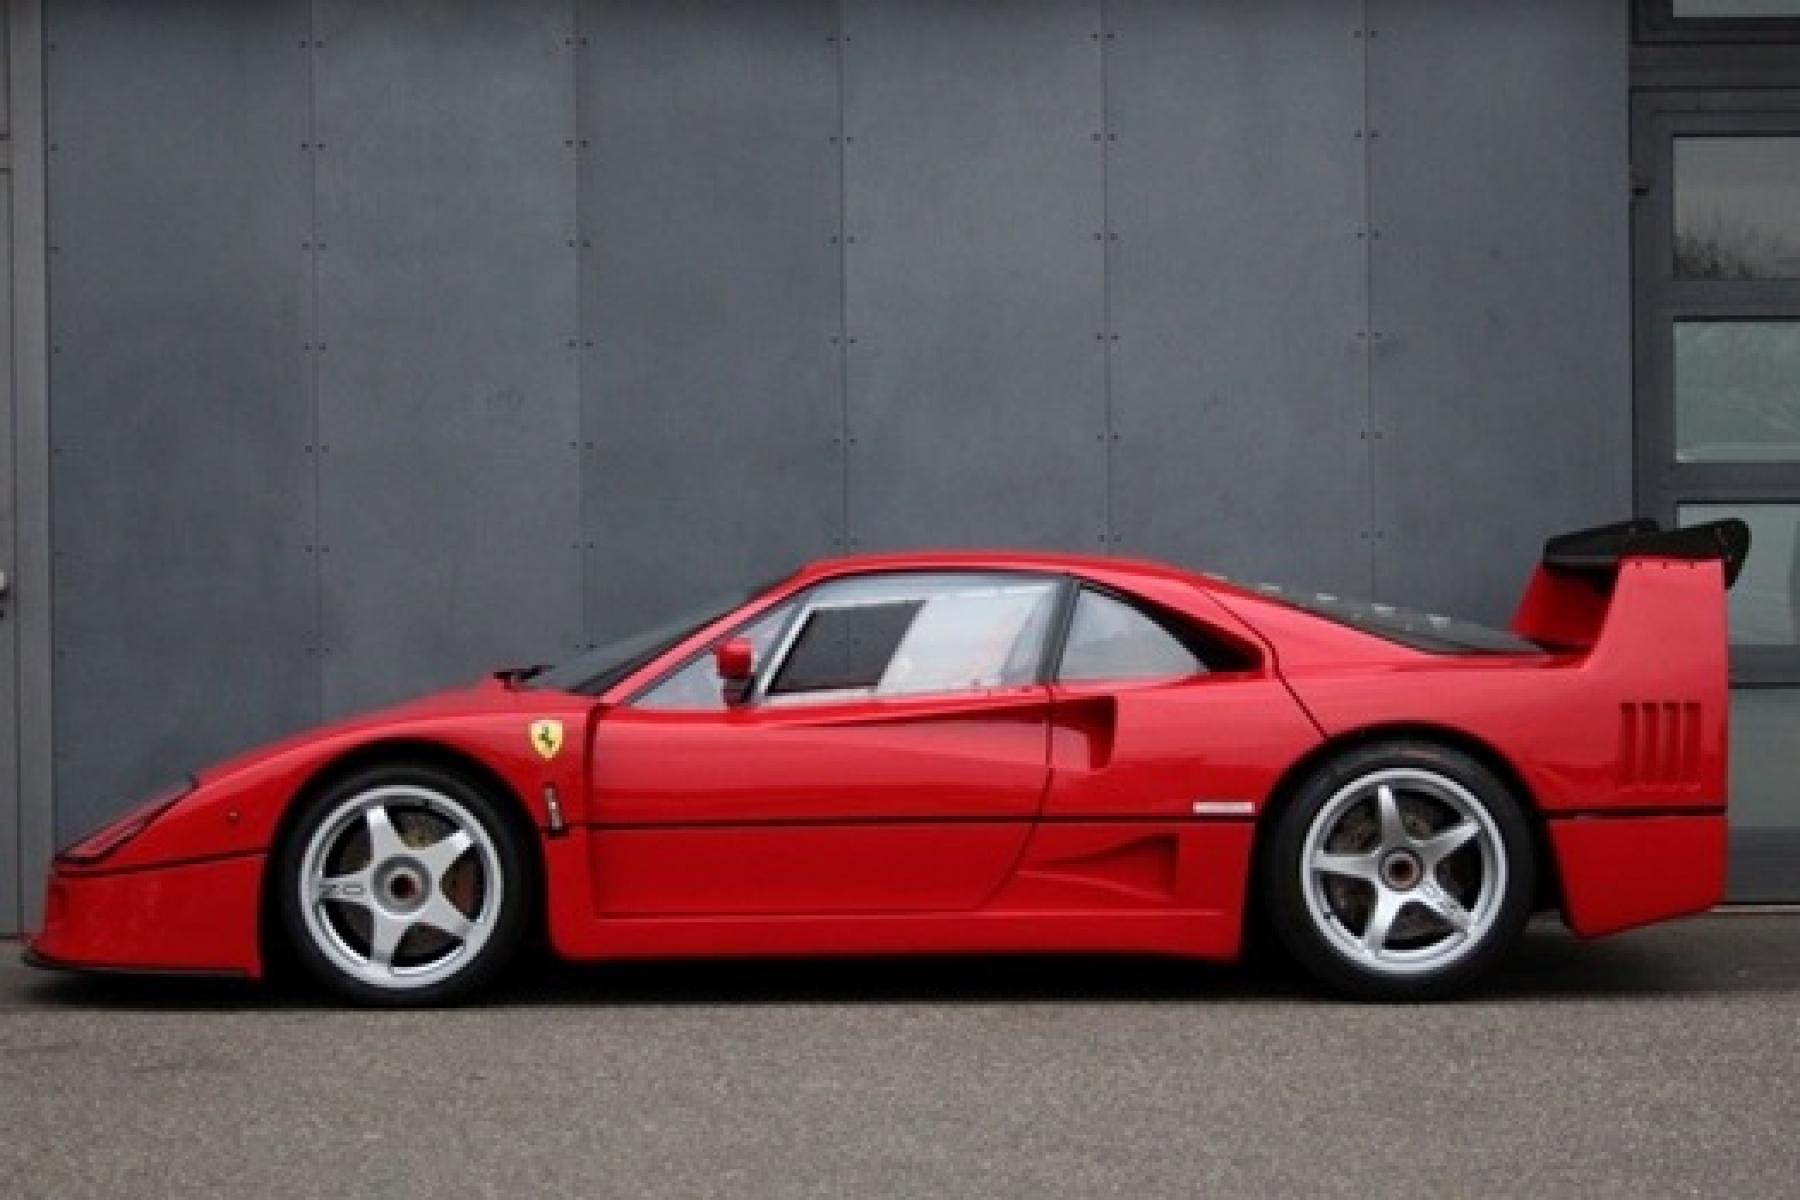 1990 Red Ferrari F40 , 0.000000, 0.000000 - 1990 Ferrari F40 1990 delivered as new in France 1992 delivered to 2nd owner in Japan from France. 2003 current owner All service record from present owner All repaint for refresh perfect skill Exchanged new cutch and master last month, was reupholstered both of the seat new fabric and spong - Photo #1